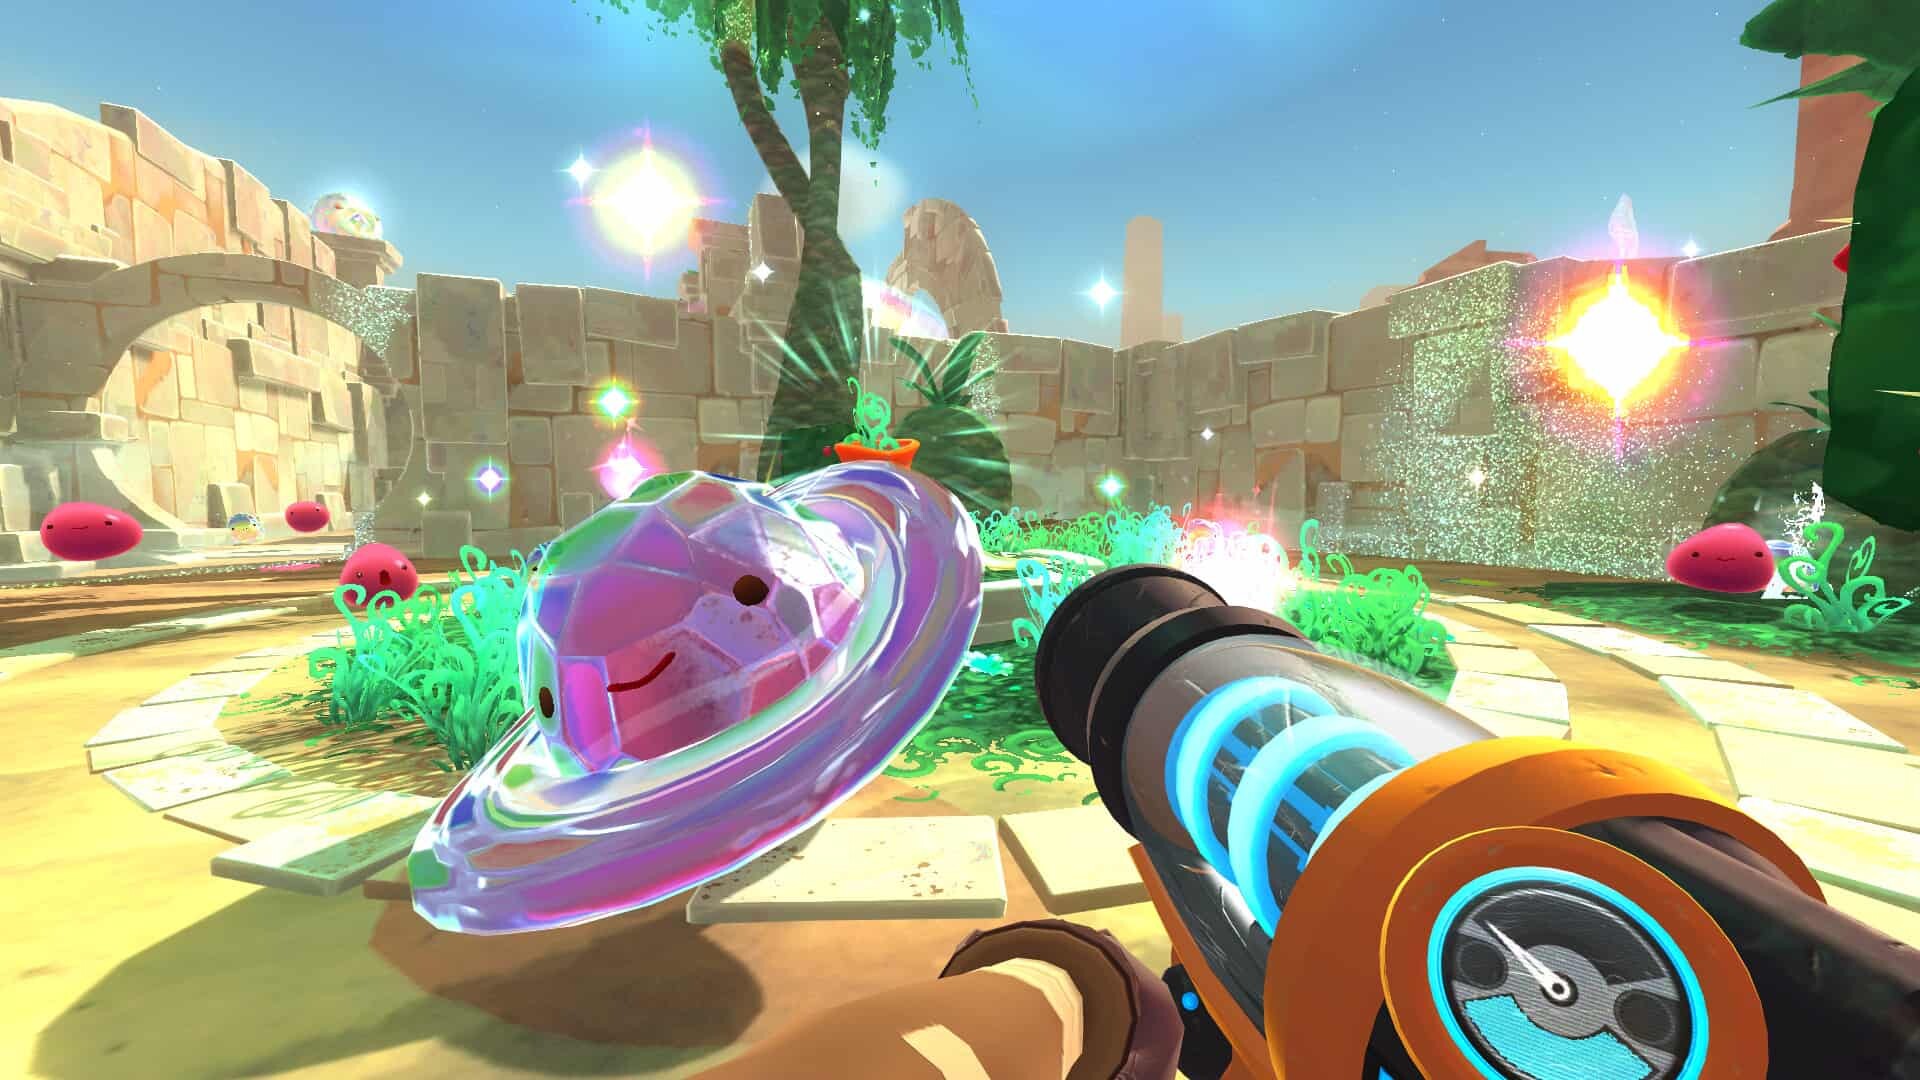 Slime Rancher from Monomi Park - An Indie Game Review